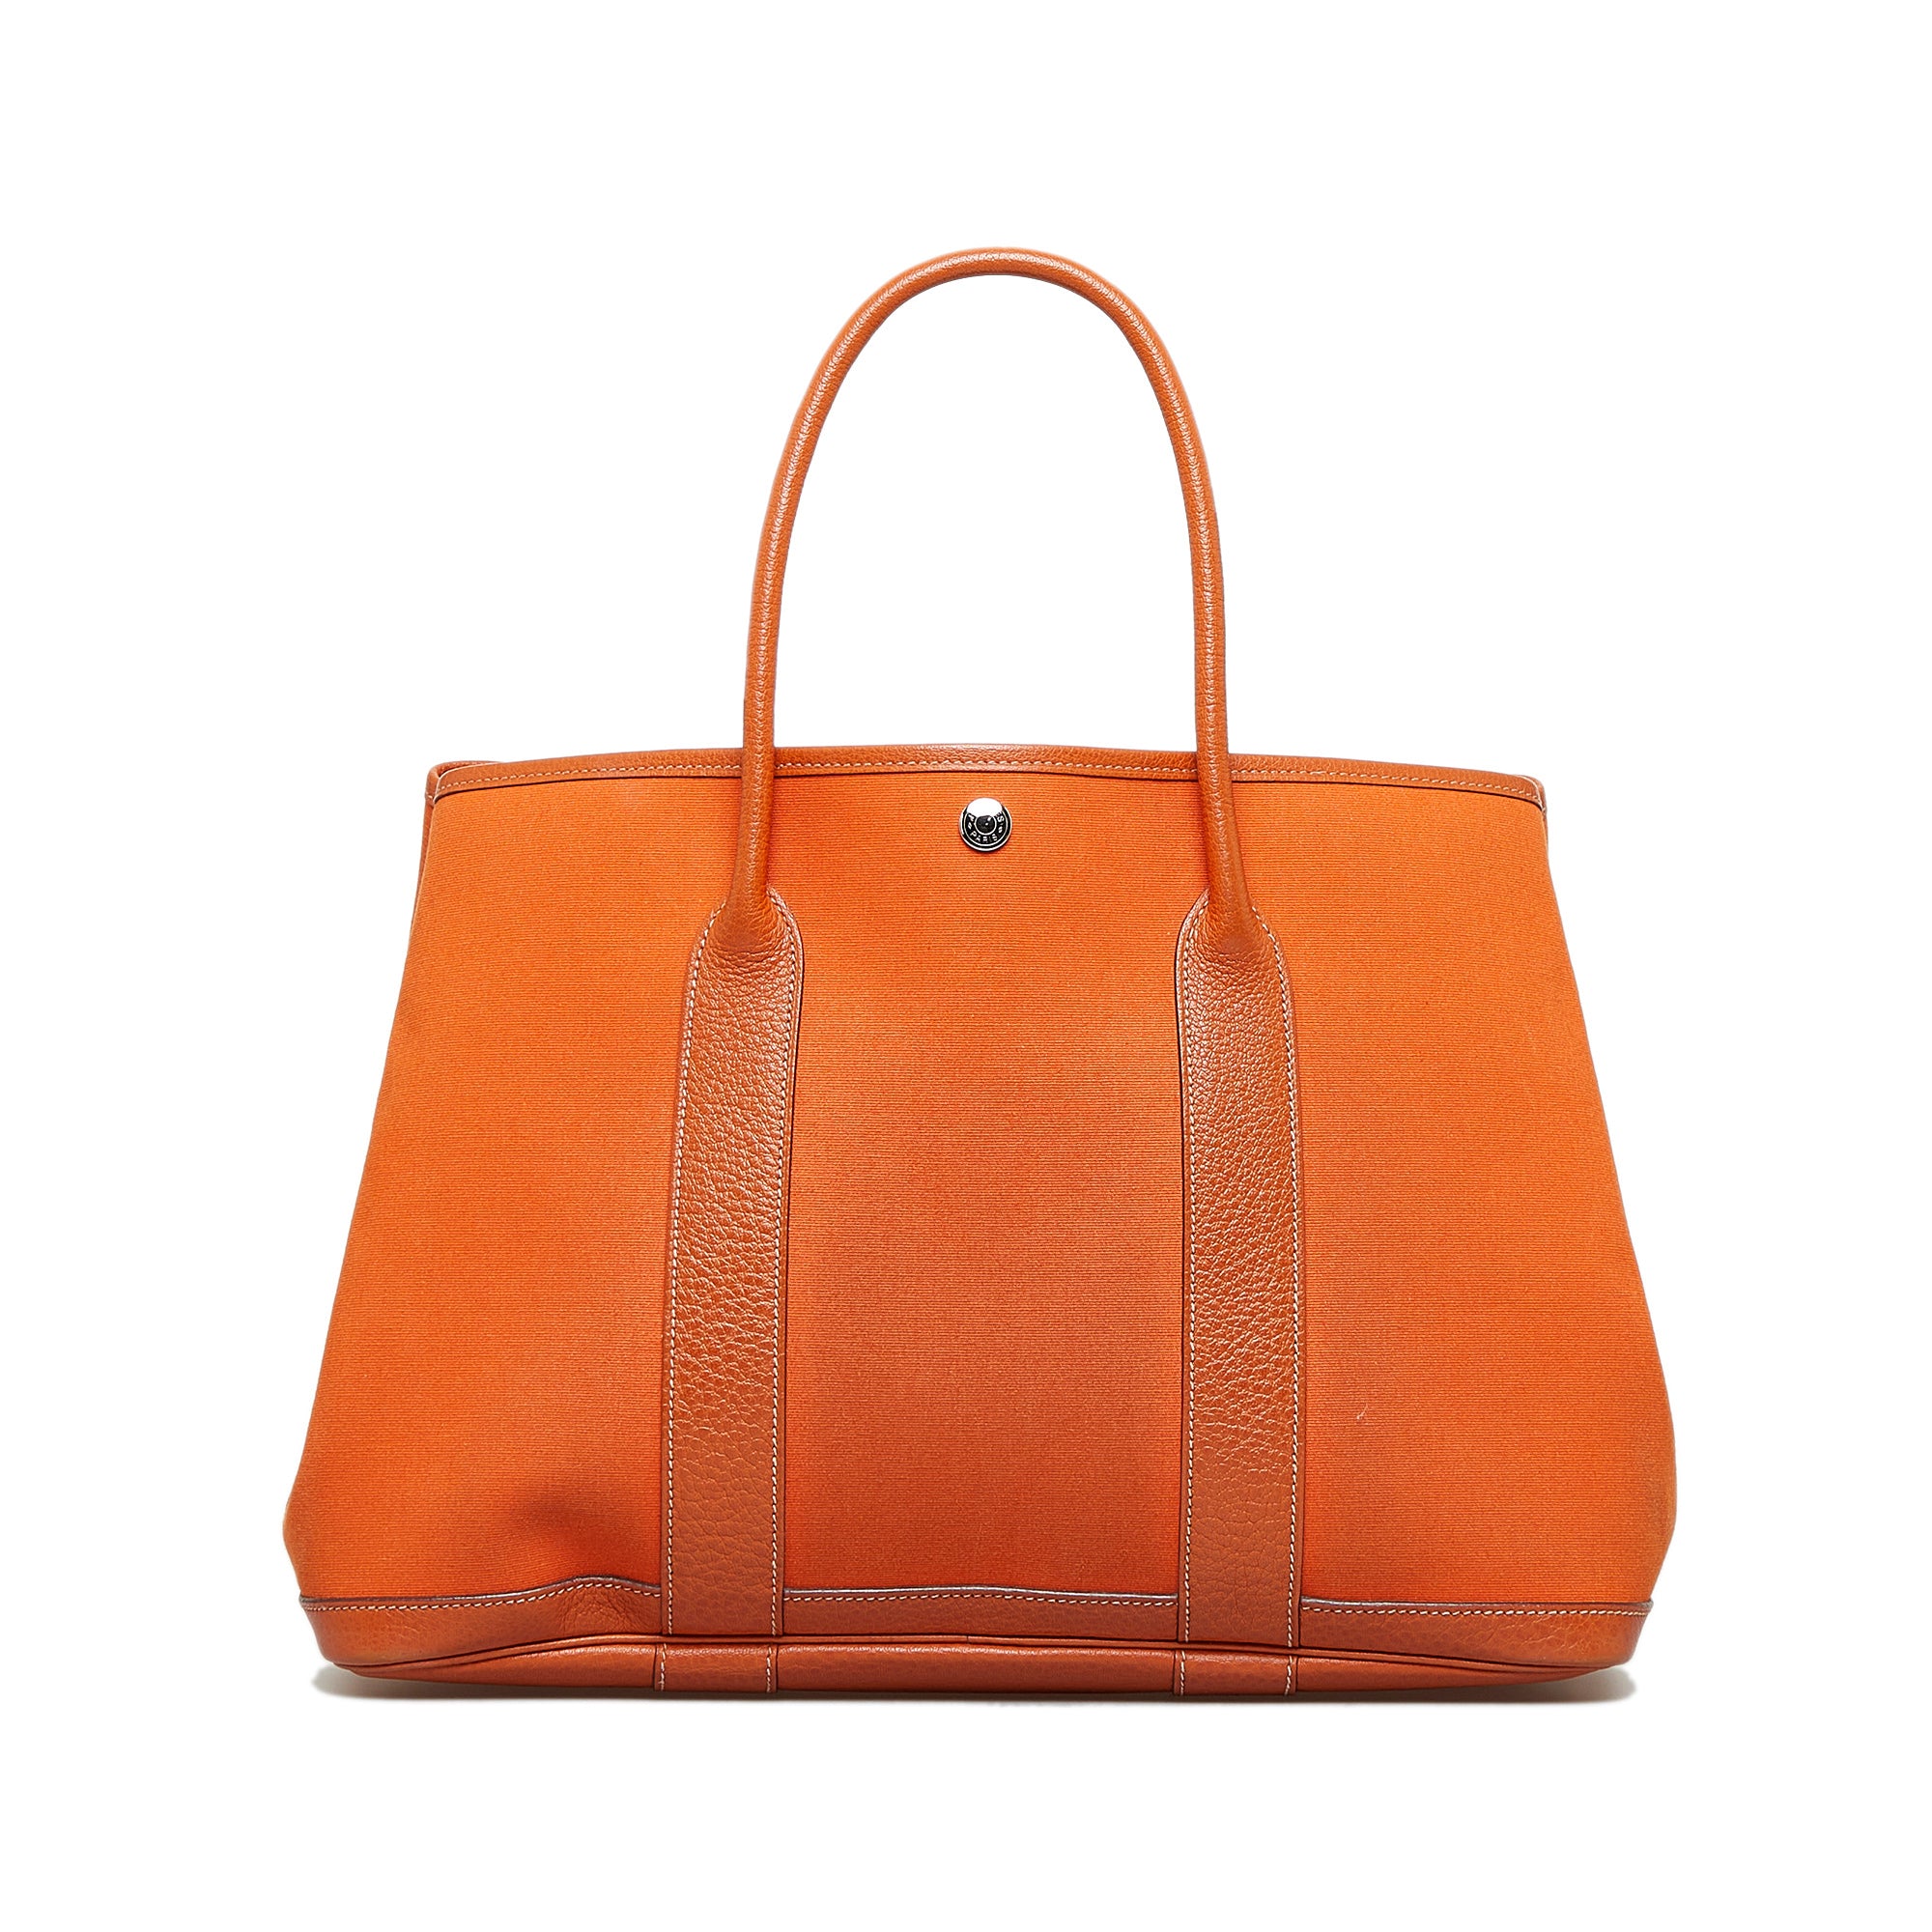 Hermes Brown Canvas and Leather Garden Party TPM Bag Hermes